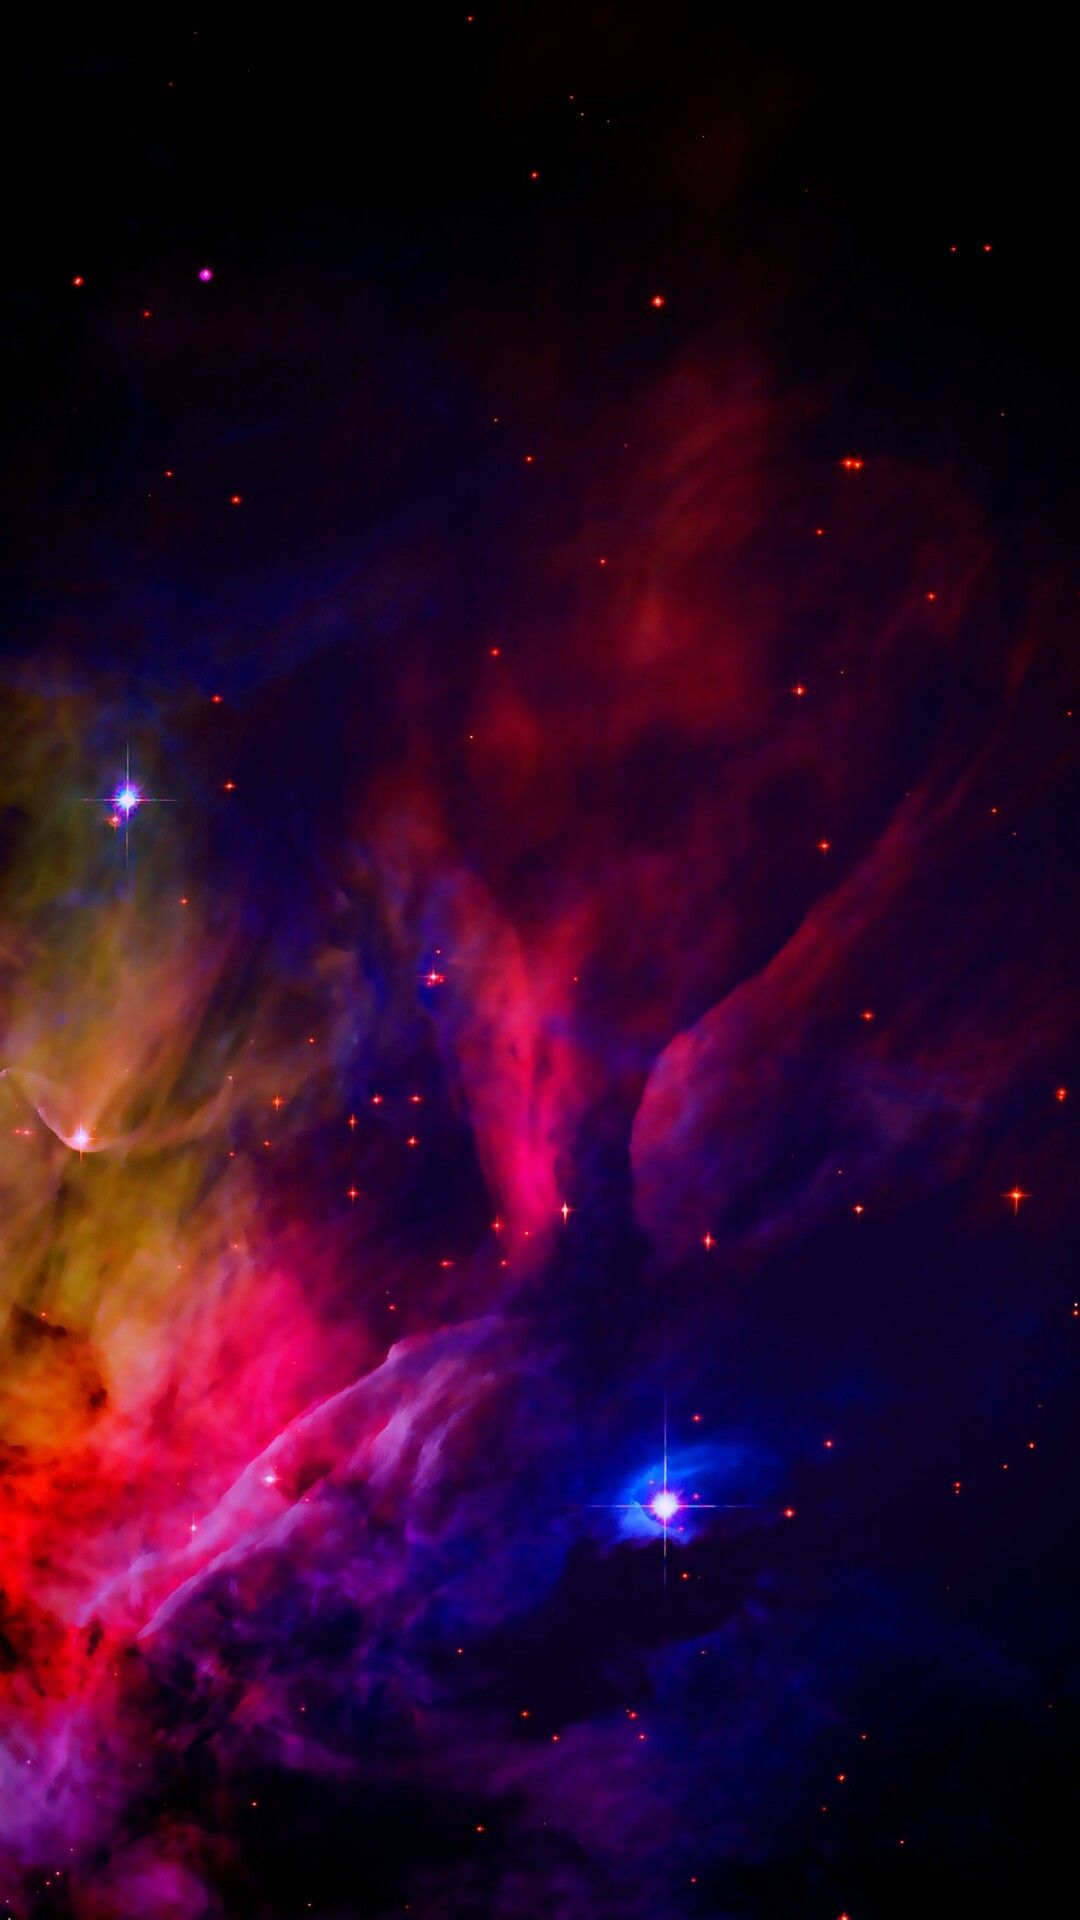 Wallpaper Party On Space In Galaxy